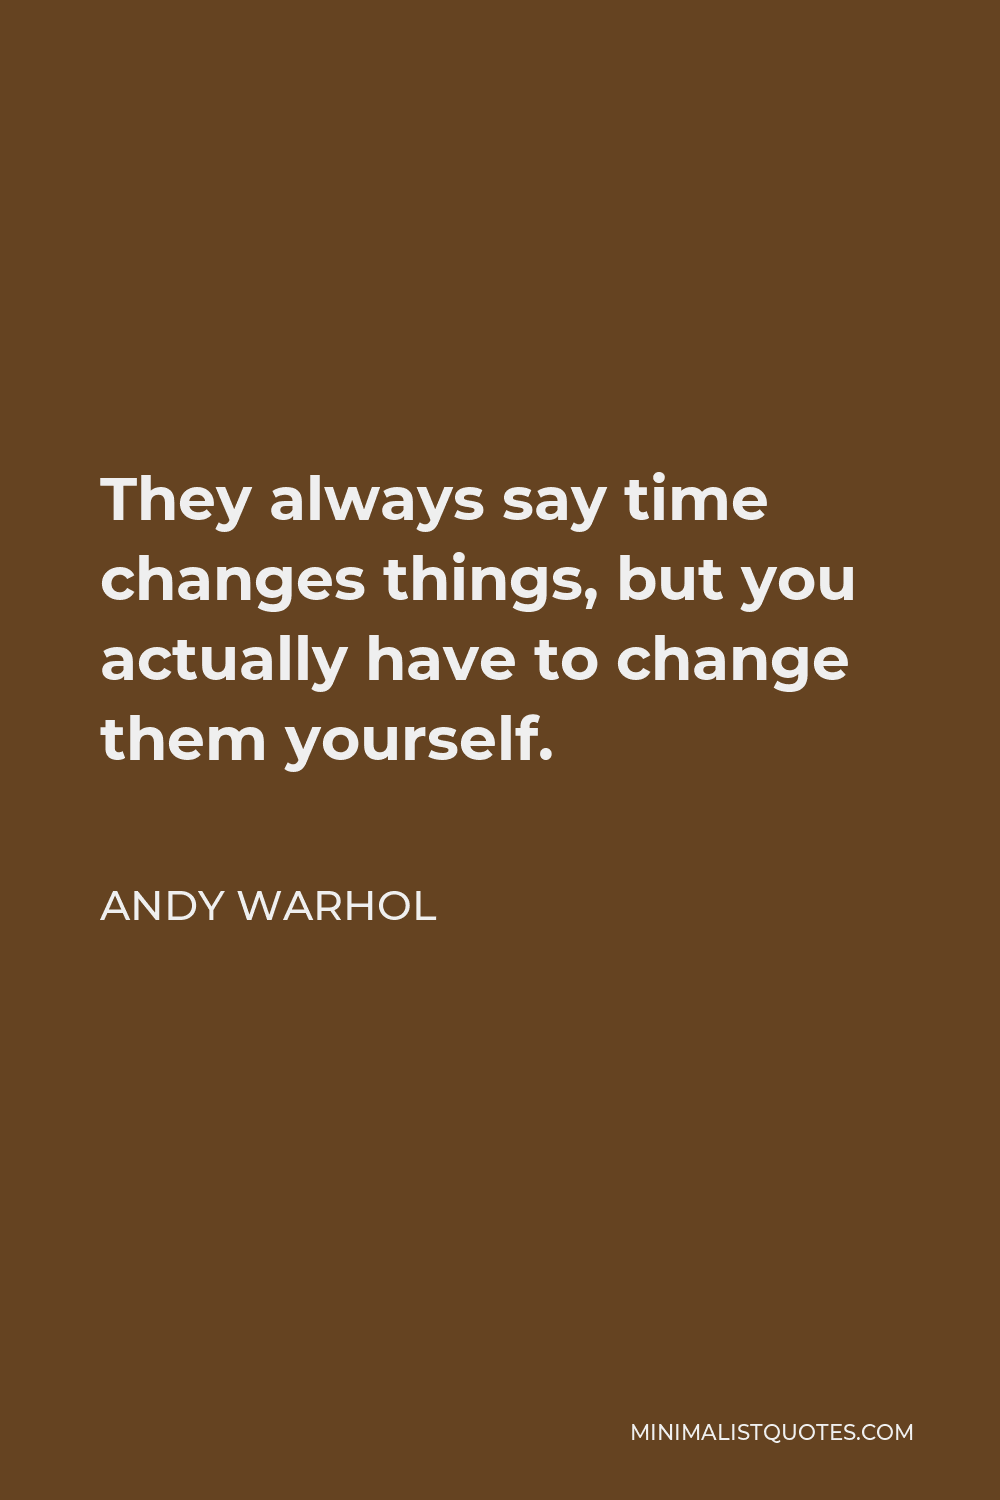 Andy Warhol Quote - They always say time changes things, but you actually have to change them yourself.